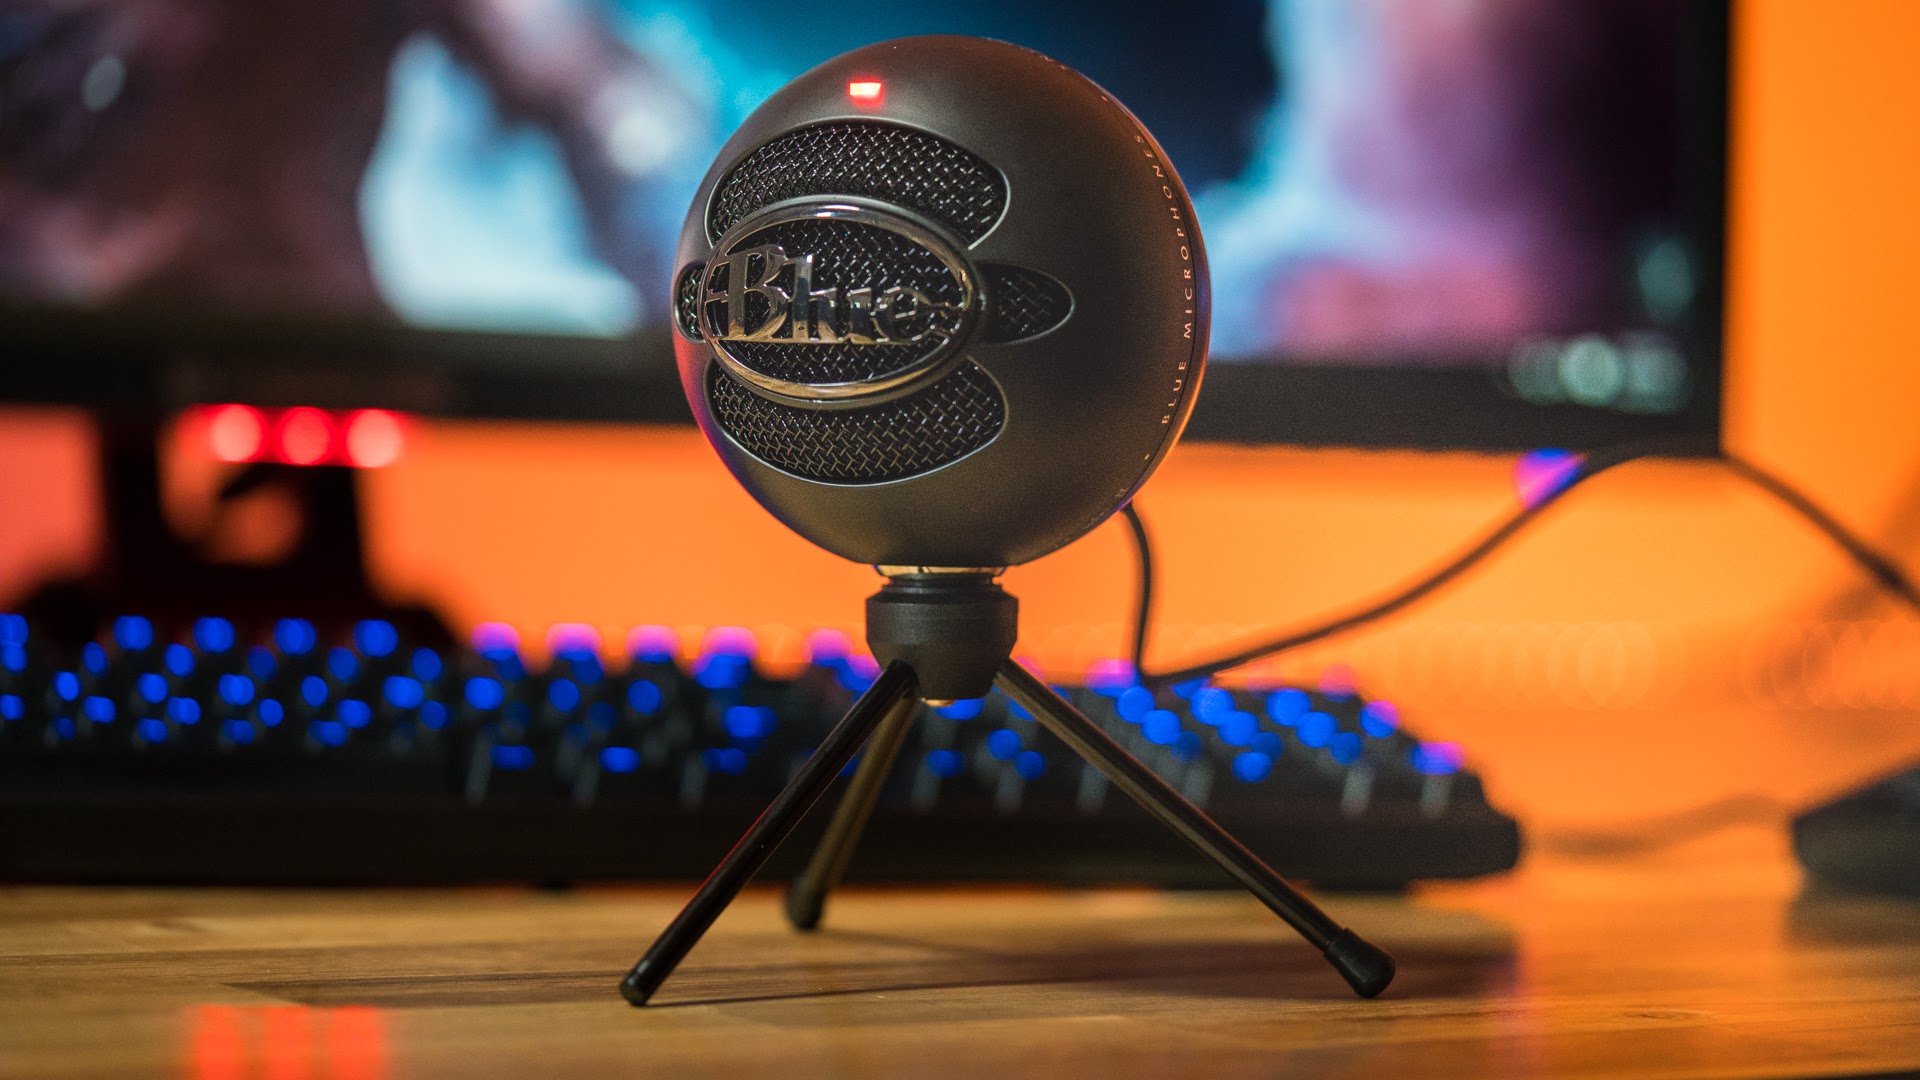 Blue Snowball vs Ice: Which is the Better